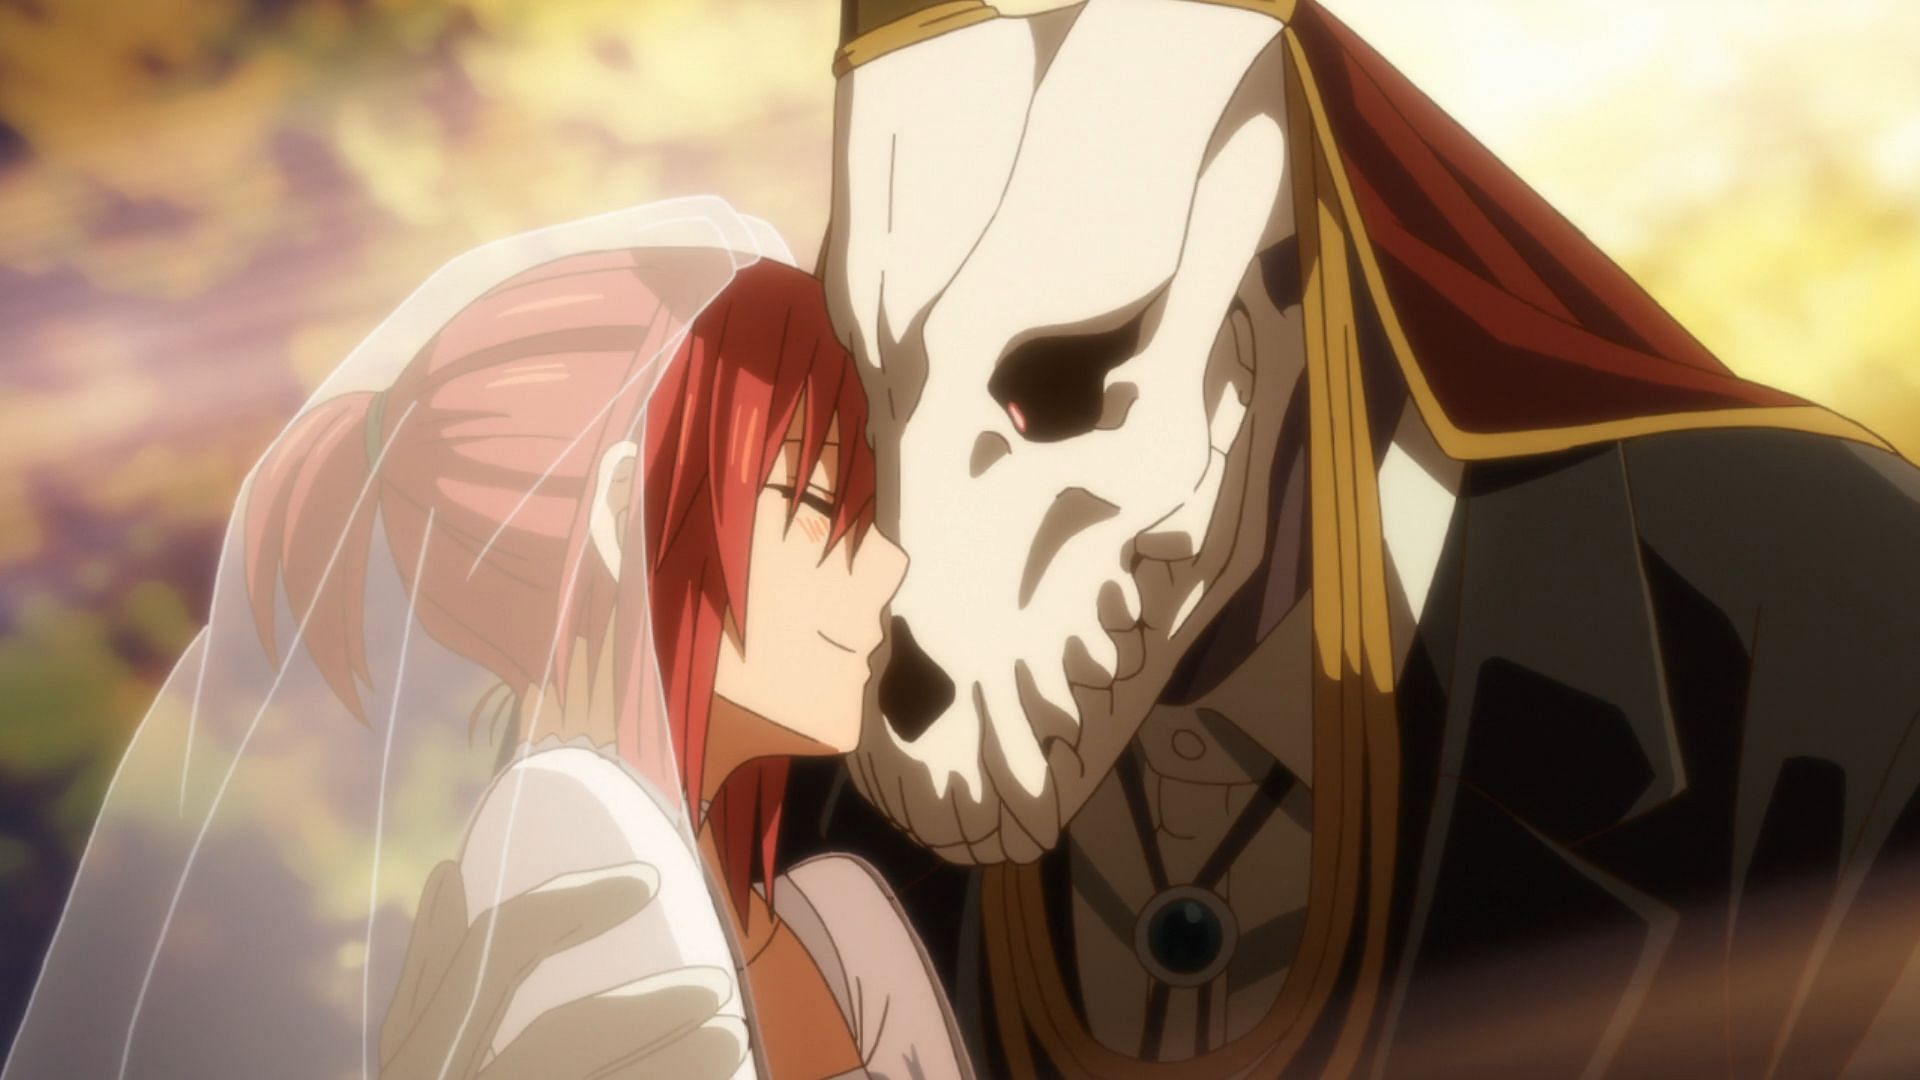 Chise and elias